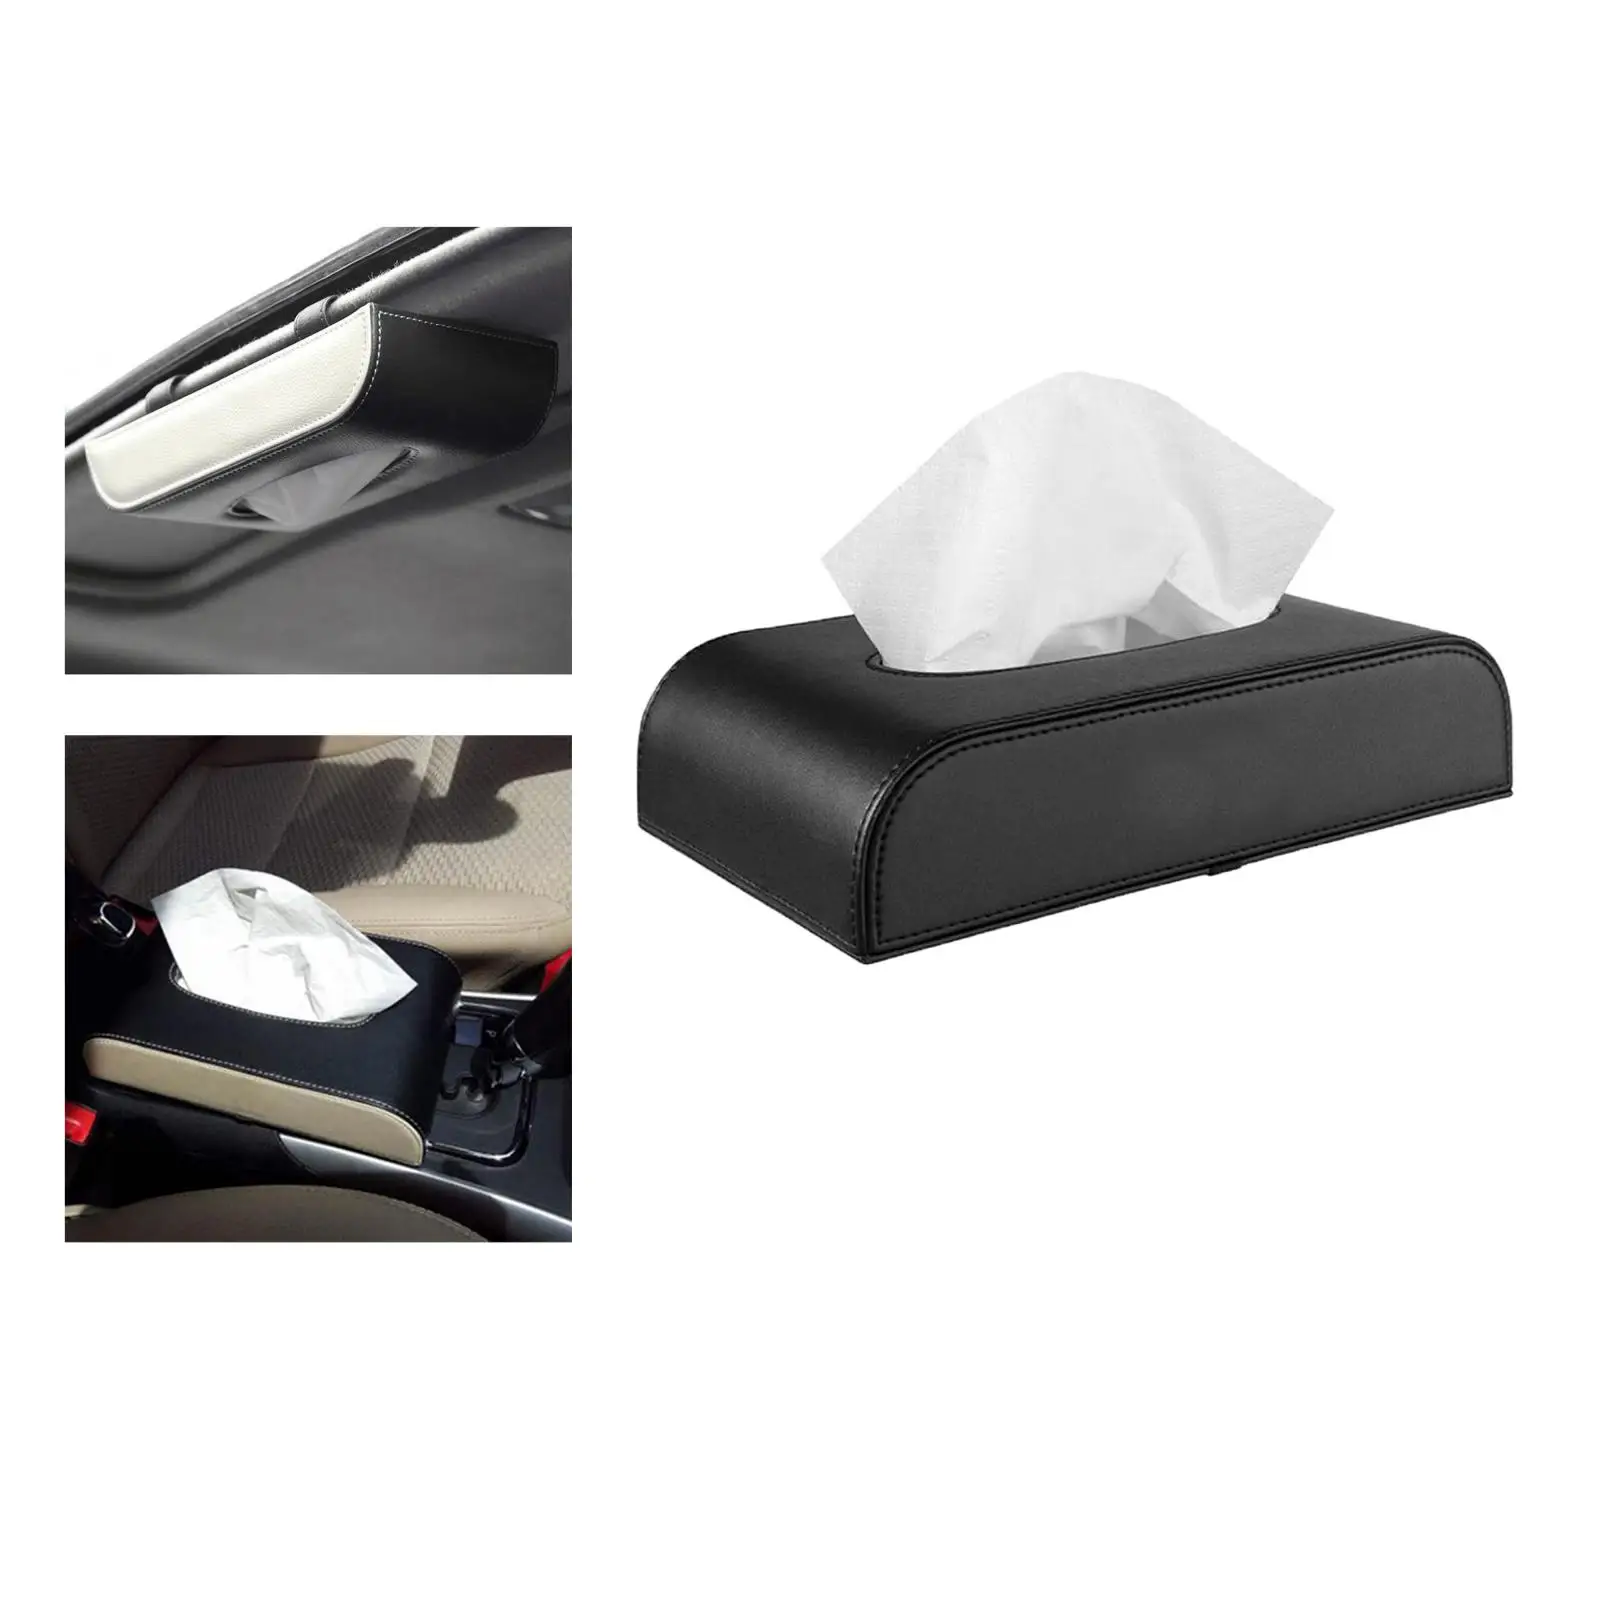 PU Leather Tissue Box Holder, Rectangular Napkin Holder Pumping Paper Case for Home Office Car Automotive Decoration